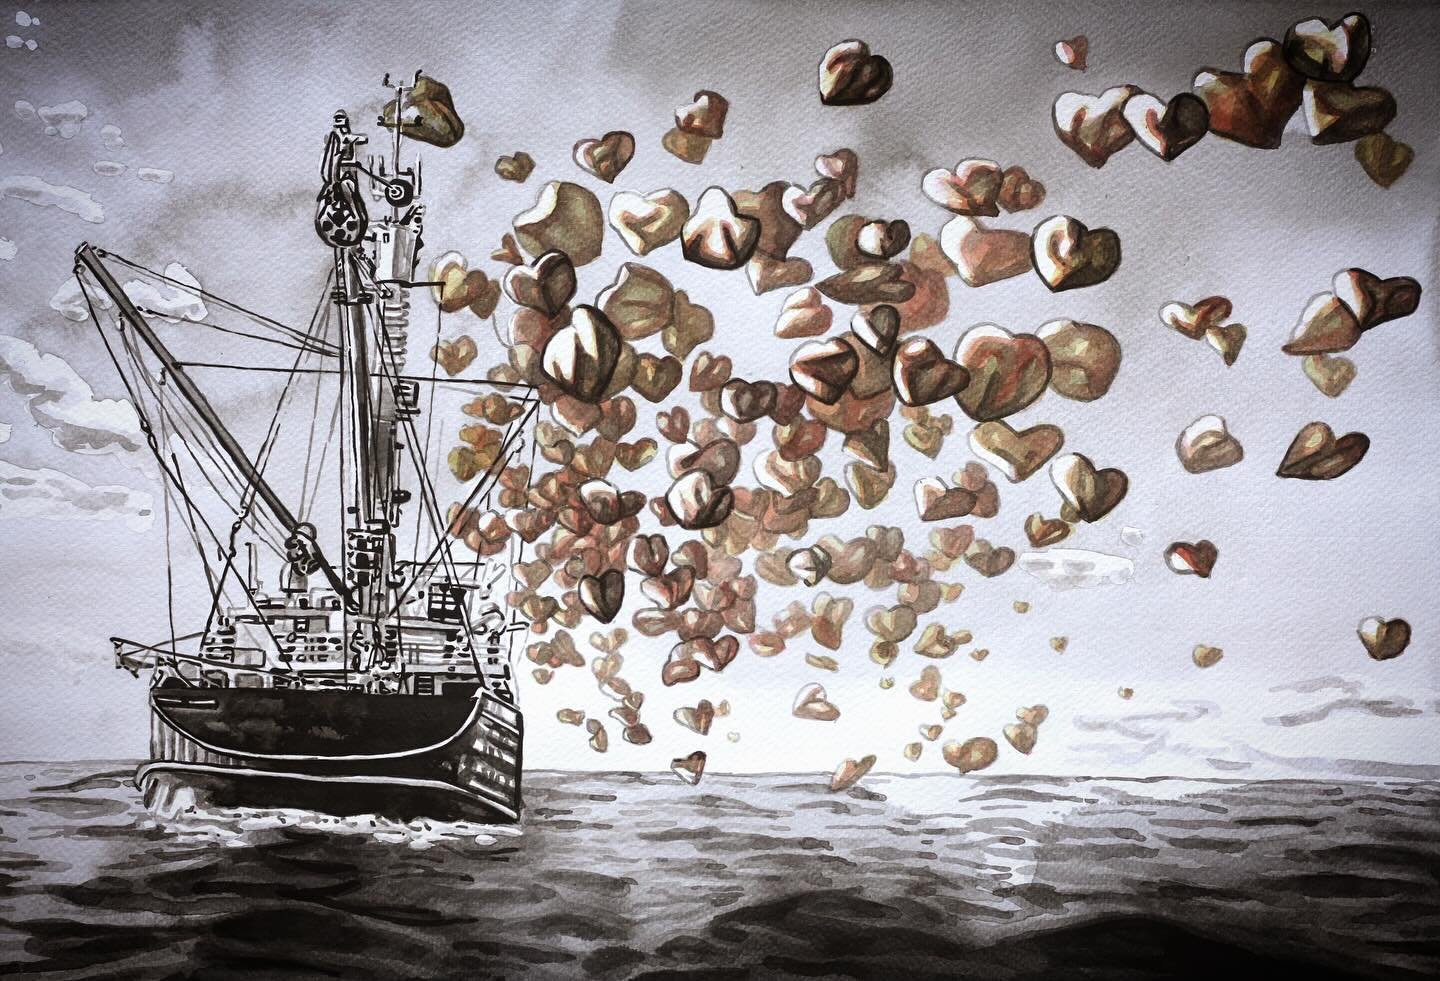 This whimsical ink painting turns a threatening vessel into something light and fun. 

Trawling is a fishing method that uses towed nets to catch fish and other marine species living on or close to the seabed. This image serves as a reminder of how h